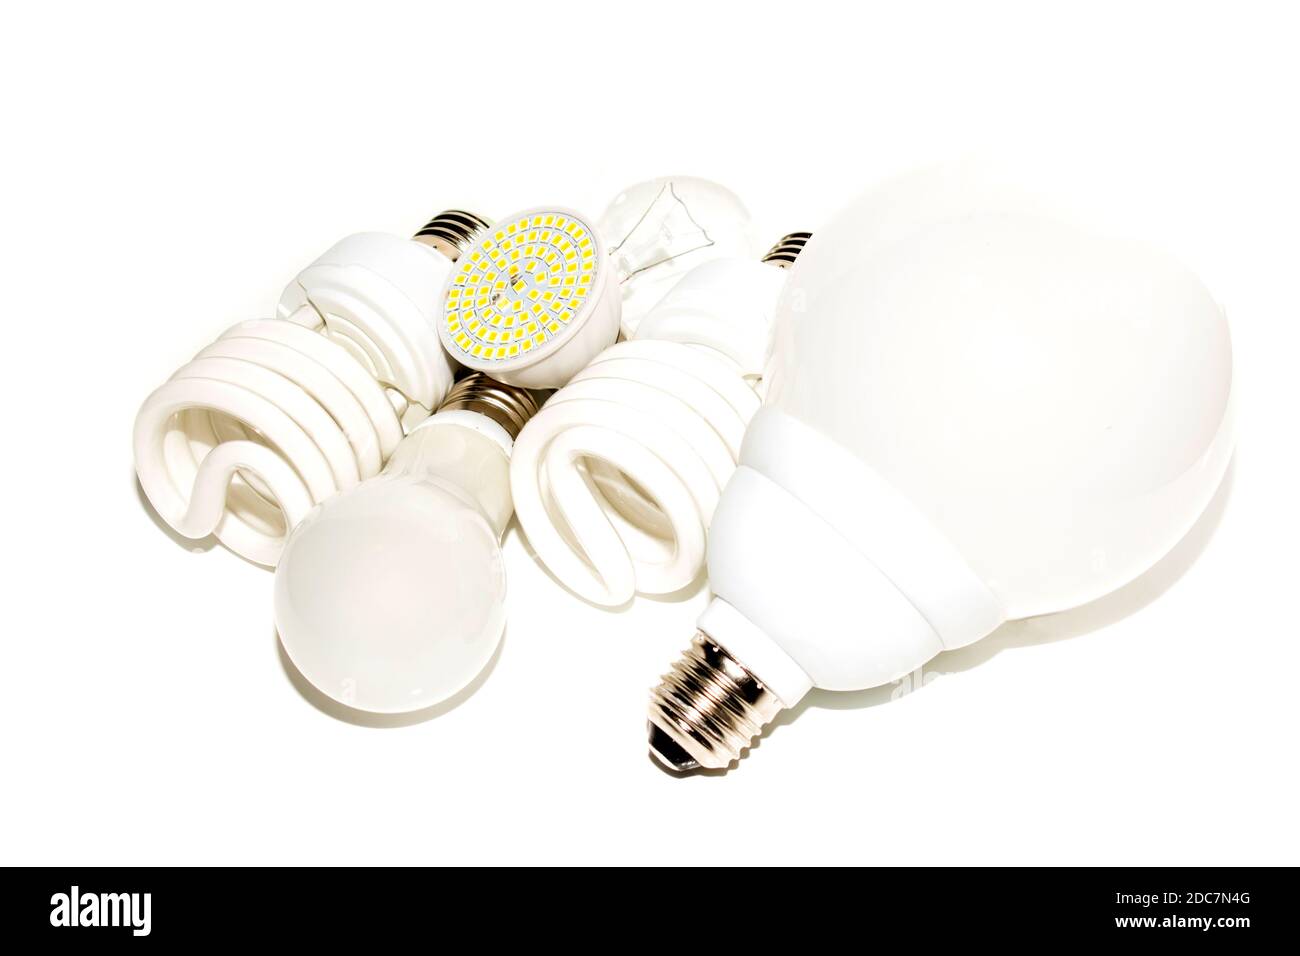 Several different led bulbs and compact fluorescent lamps with the size of the male screw base E27 on a light background Stock Photo